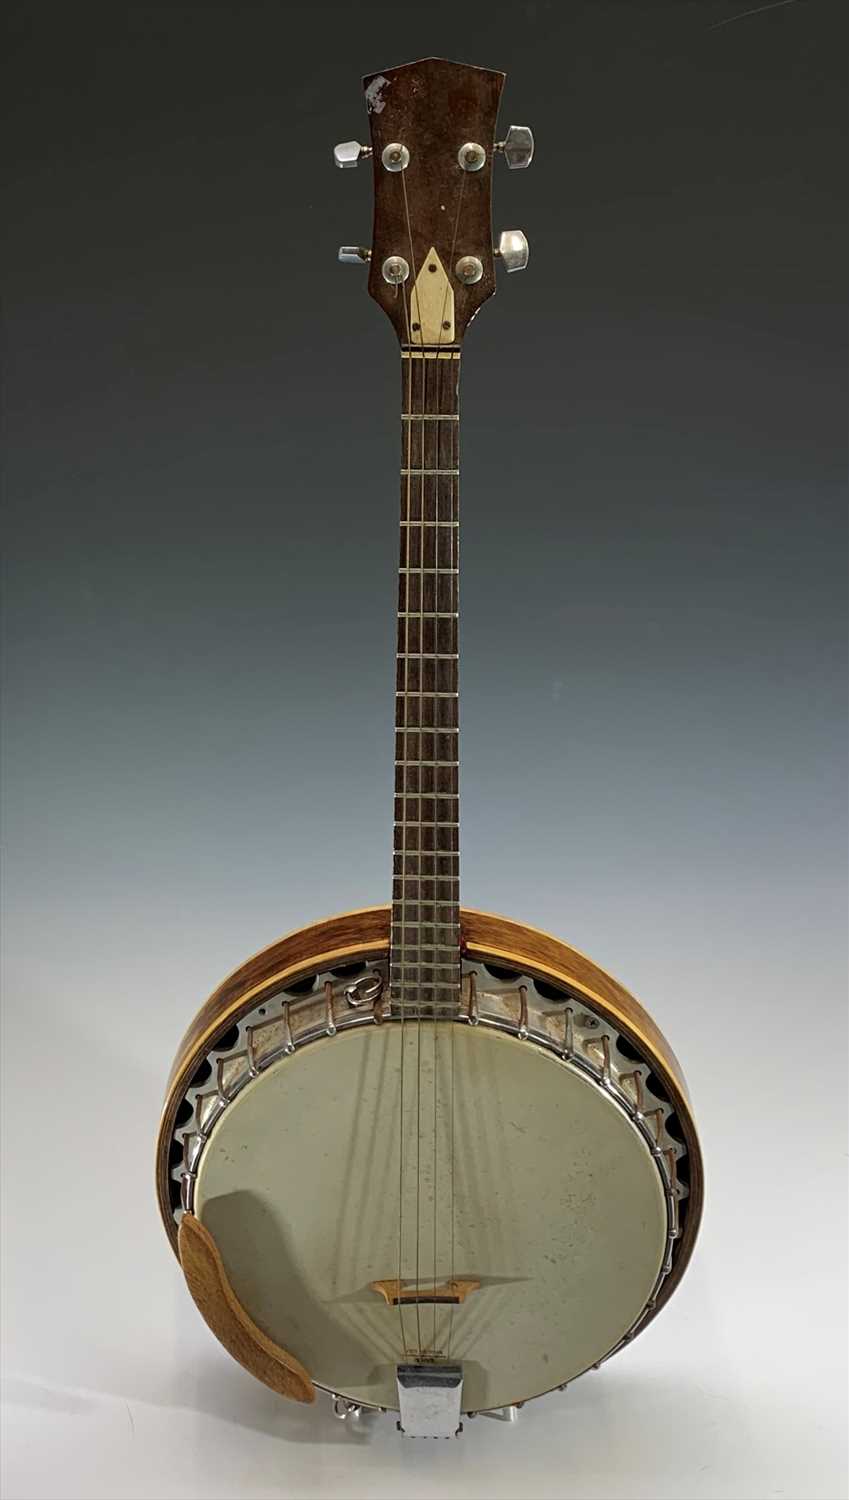 Lot 98 - A Remo Weather King four string banjo.